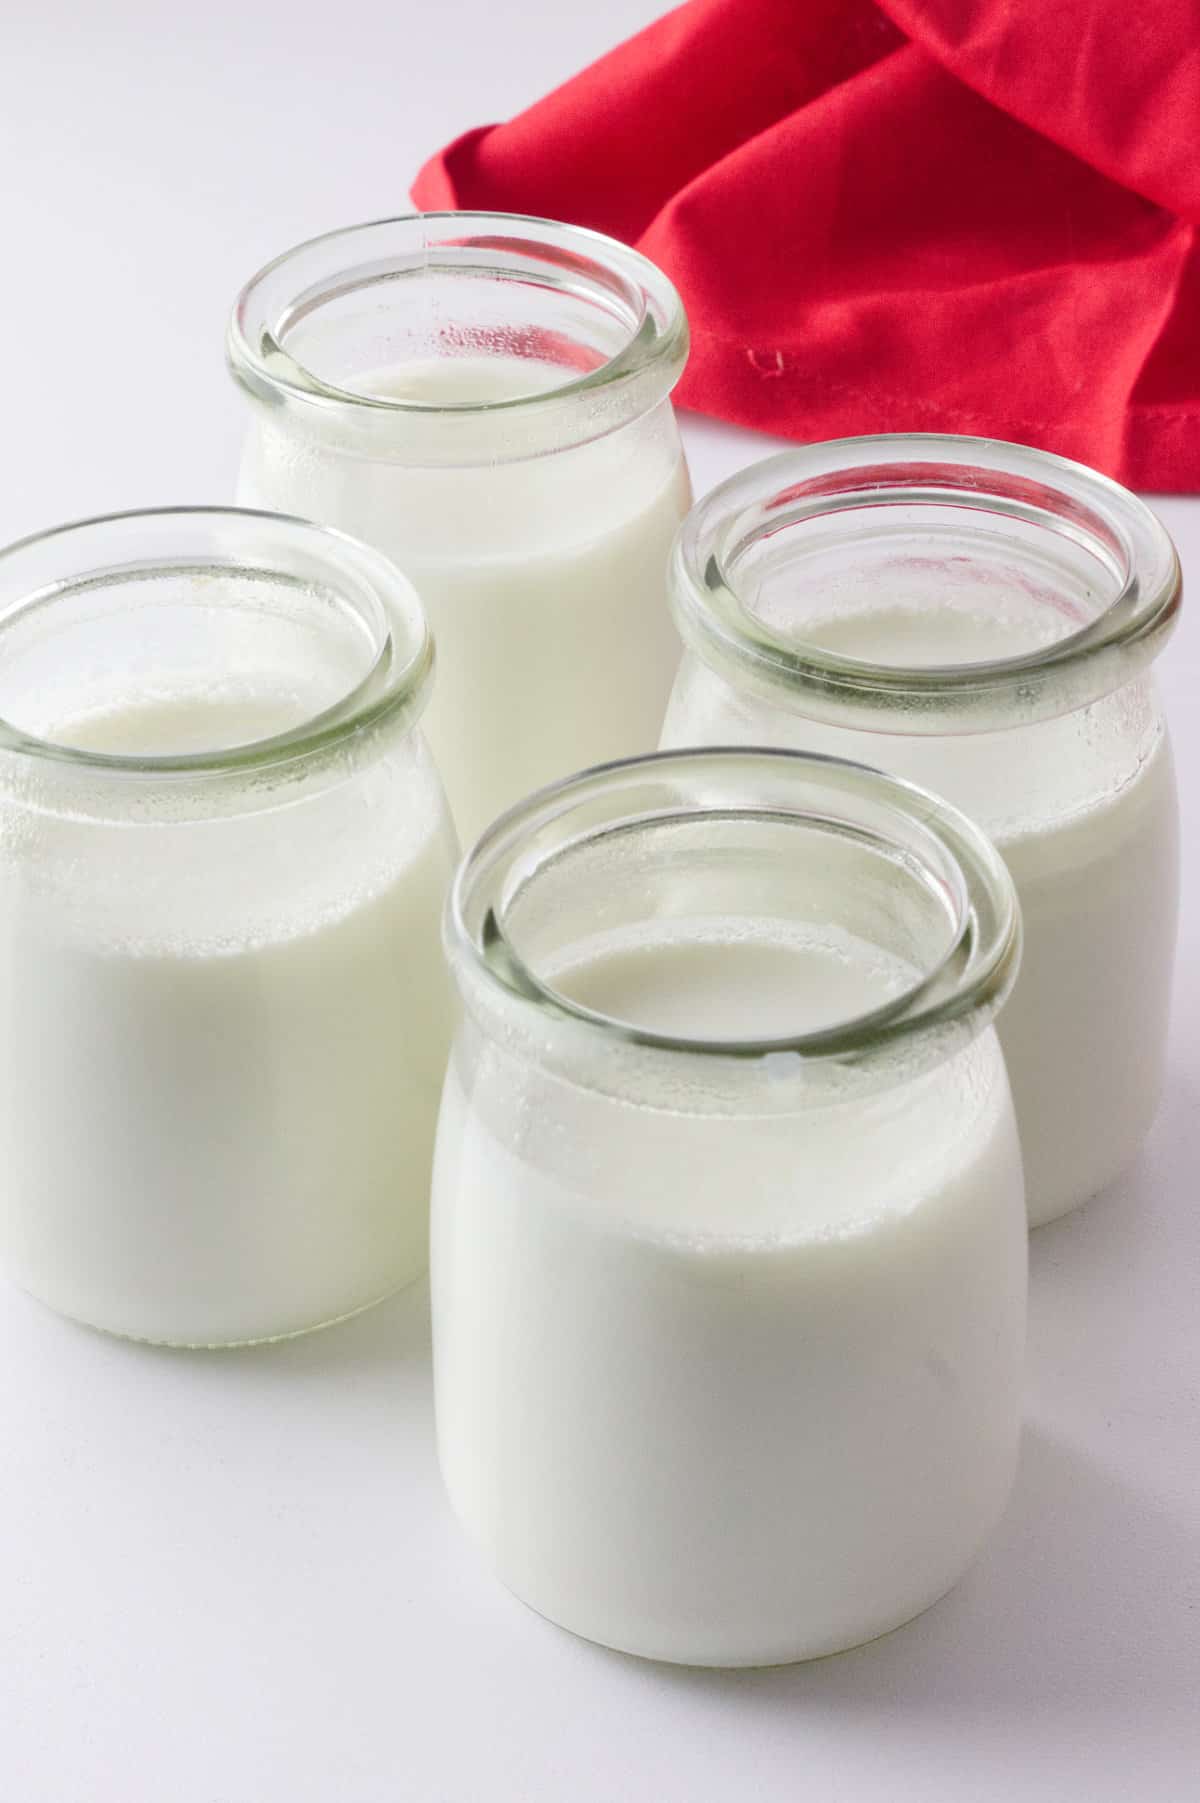 four clear glass jars of fermented milk on white background with red napkin.